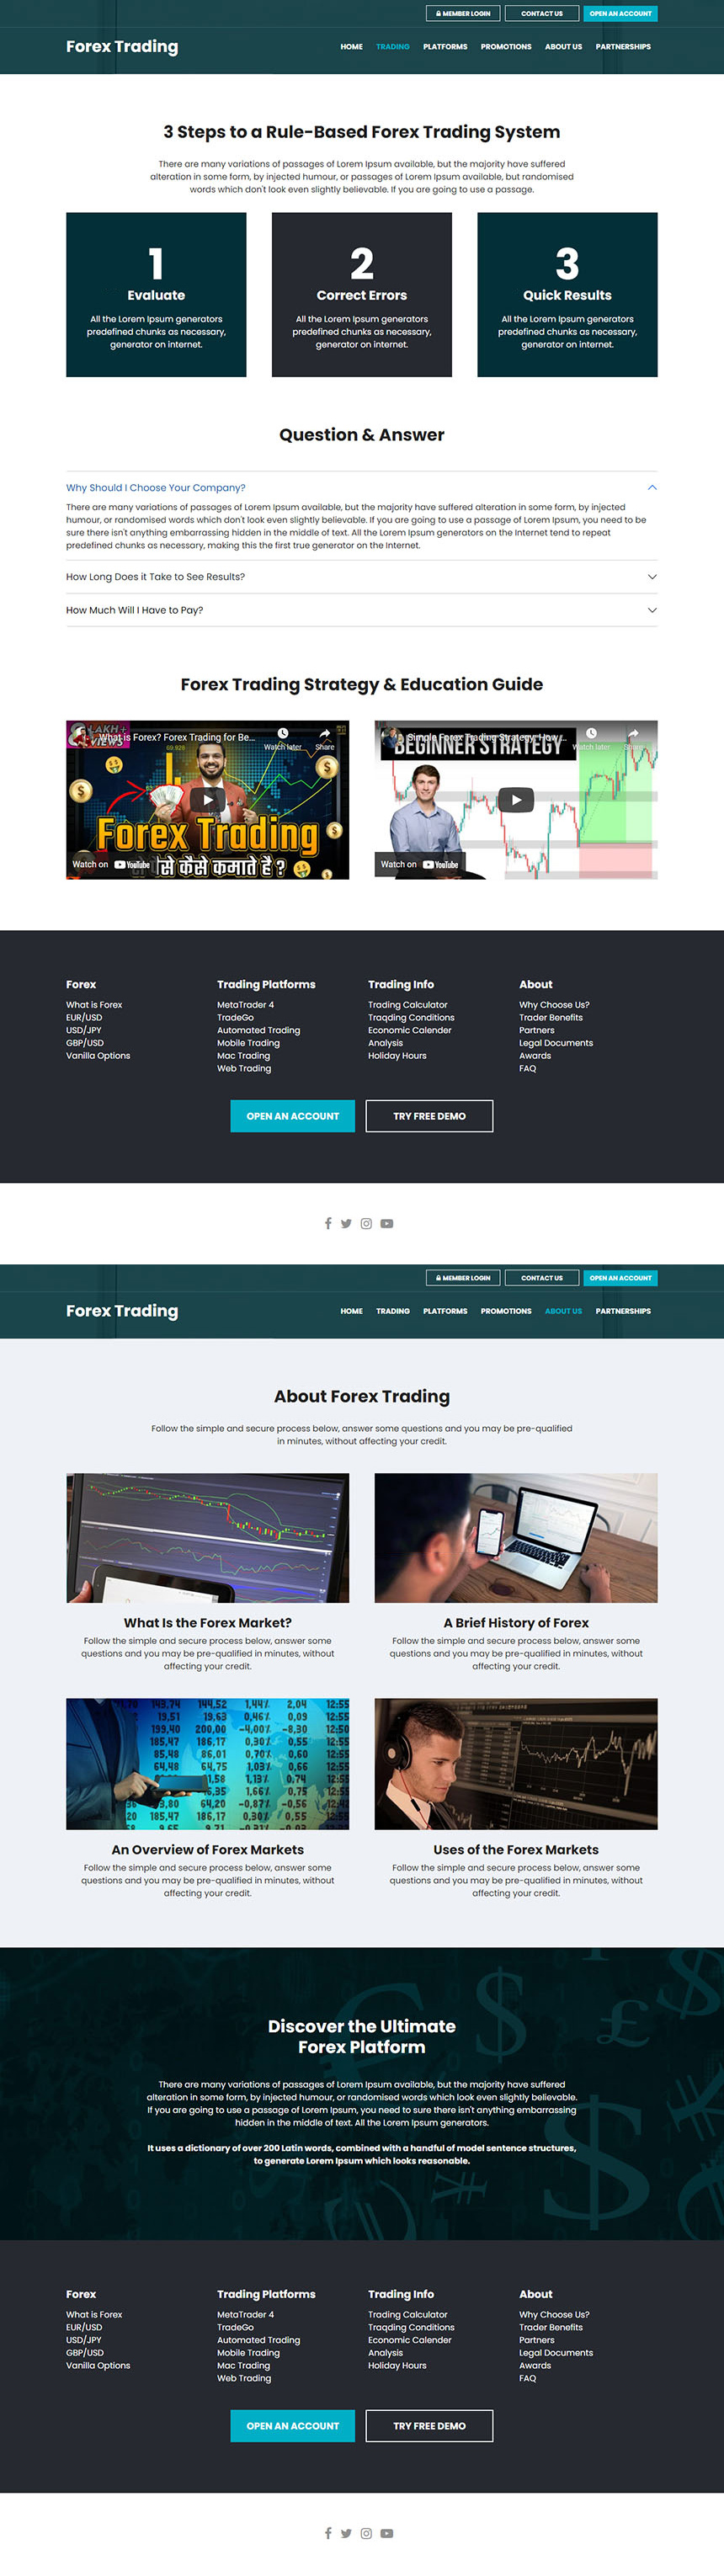 forex trading services professional website design